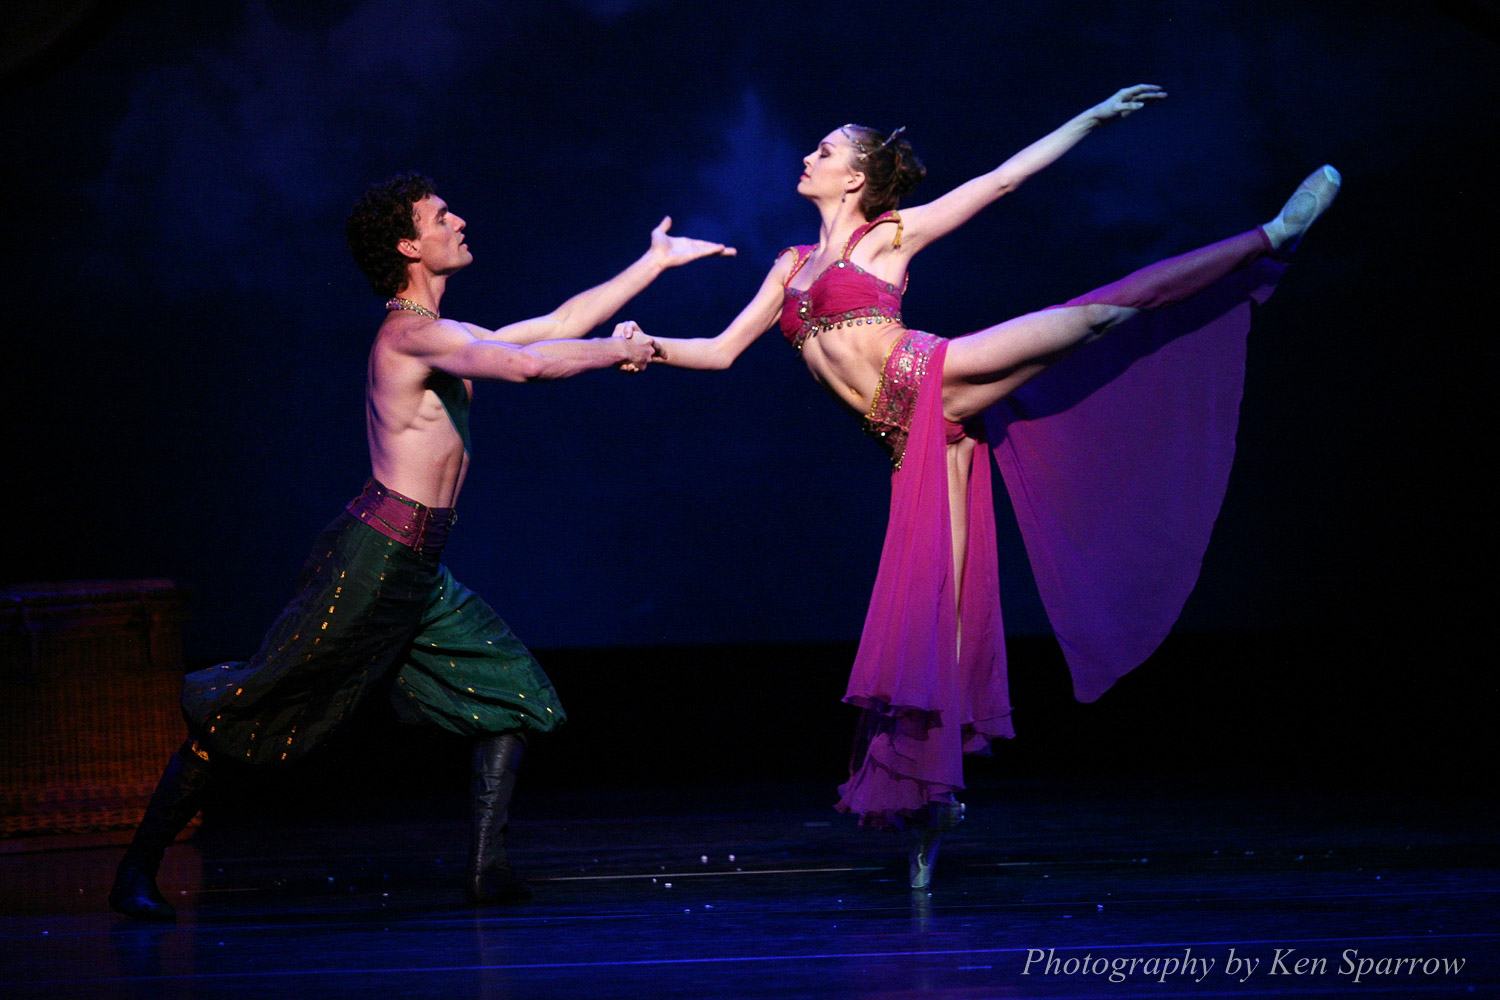 Samuel Colby and Clare Morehen, "The Nutcracker", 2007